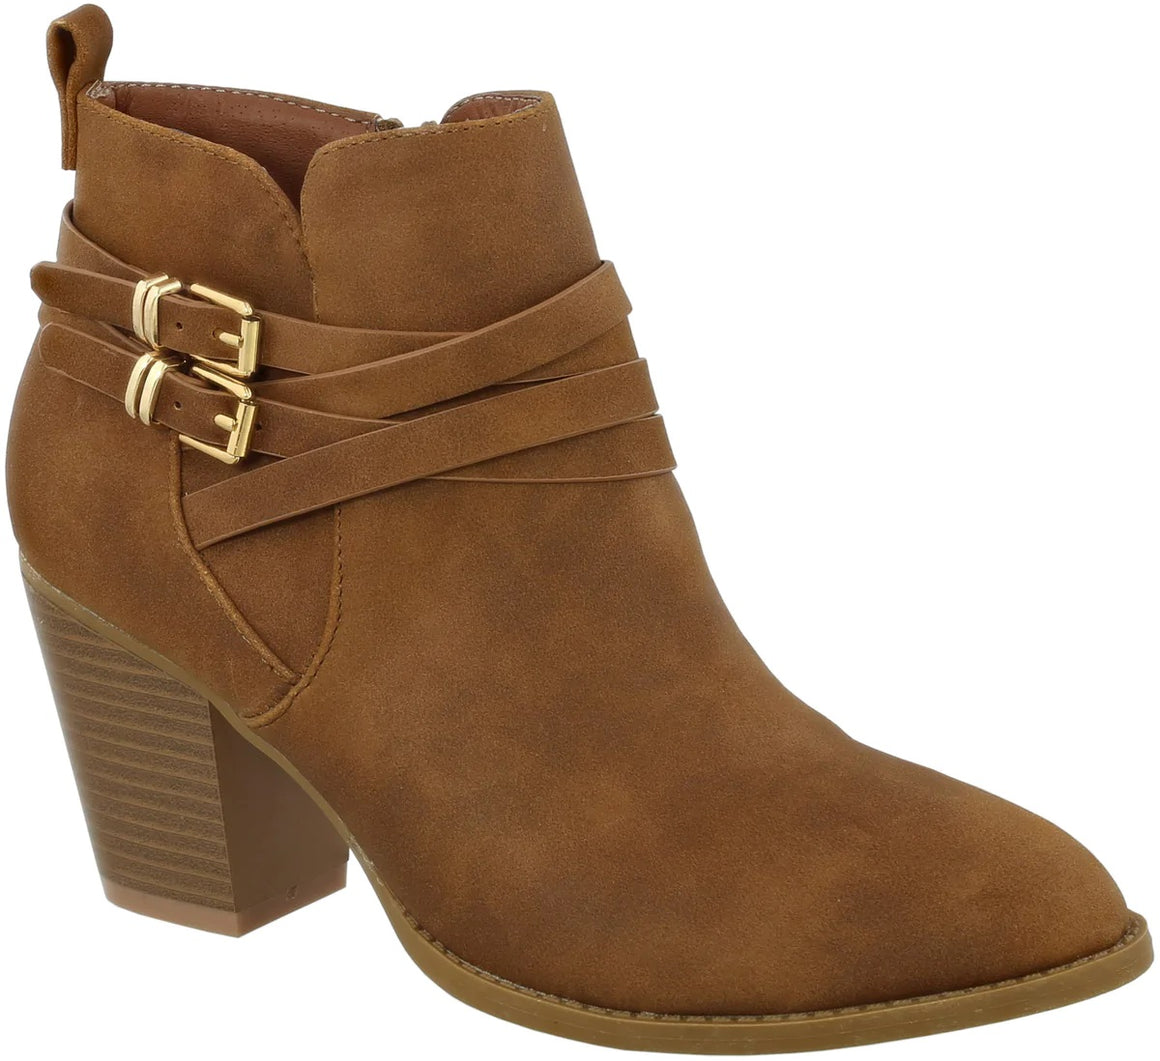 2Buckle Ankle Straps Bootie (TAN)